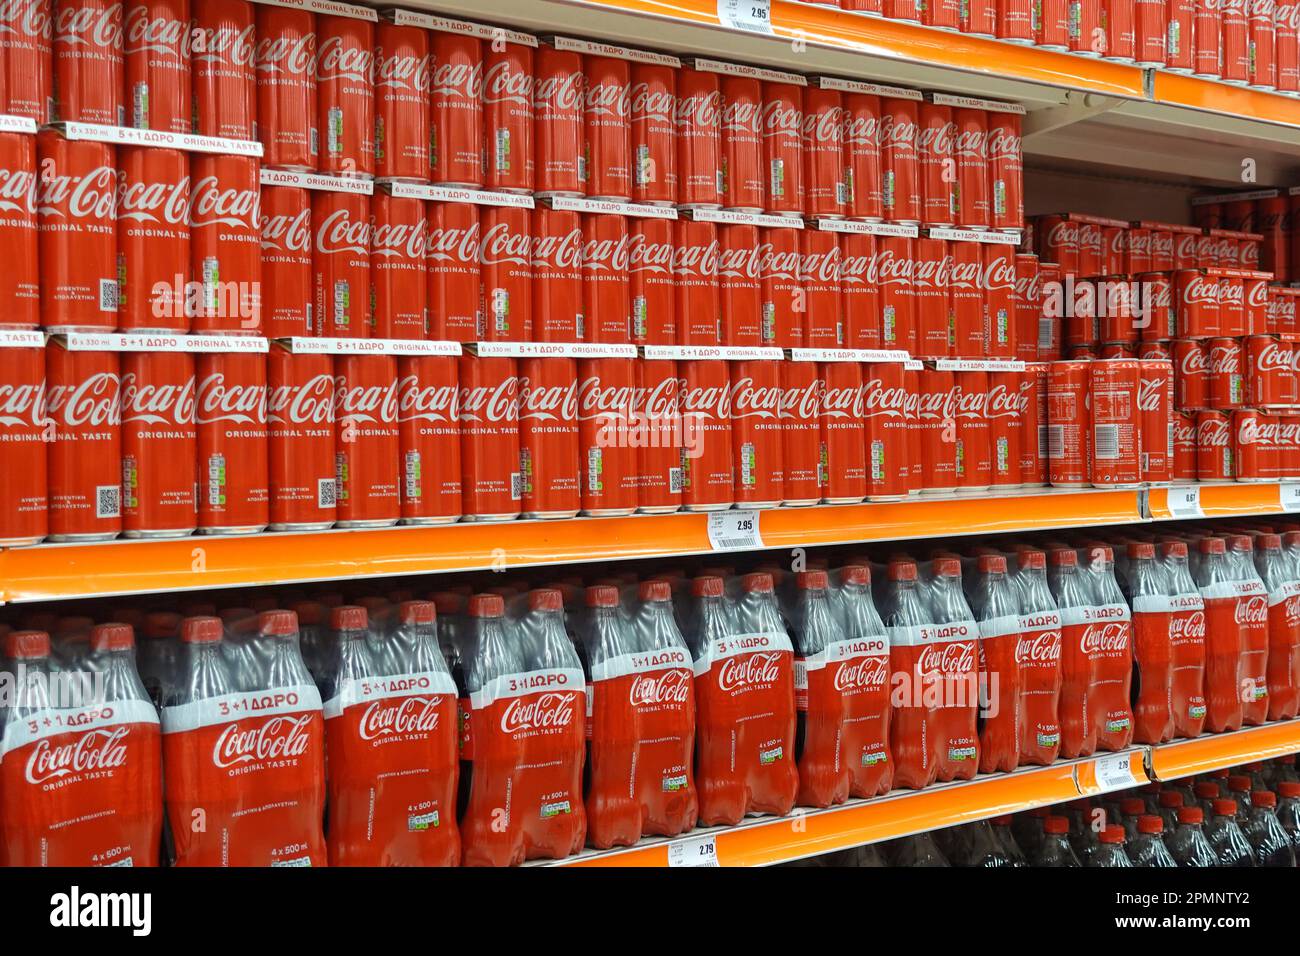 Athens, Greece - March 6, 2023: Shelves with Coca Cola soft drink cans and bottles in economy size packs. Stock Photo